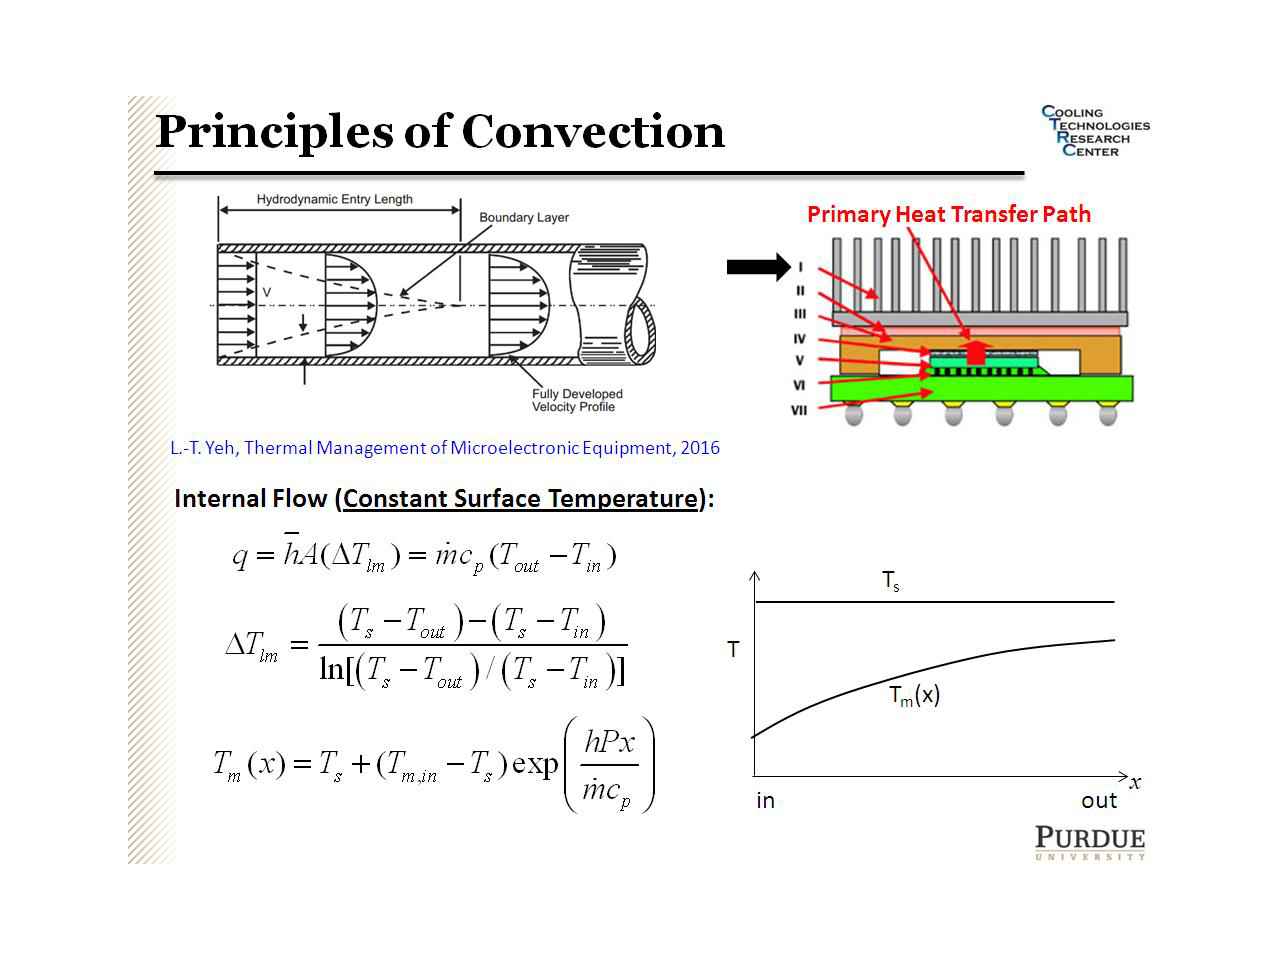 Principles of Convection